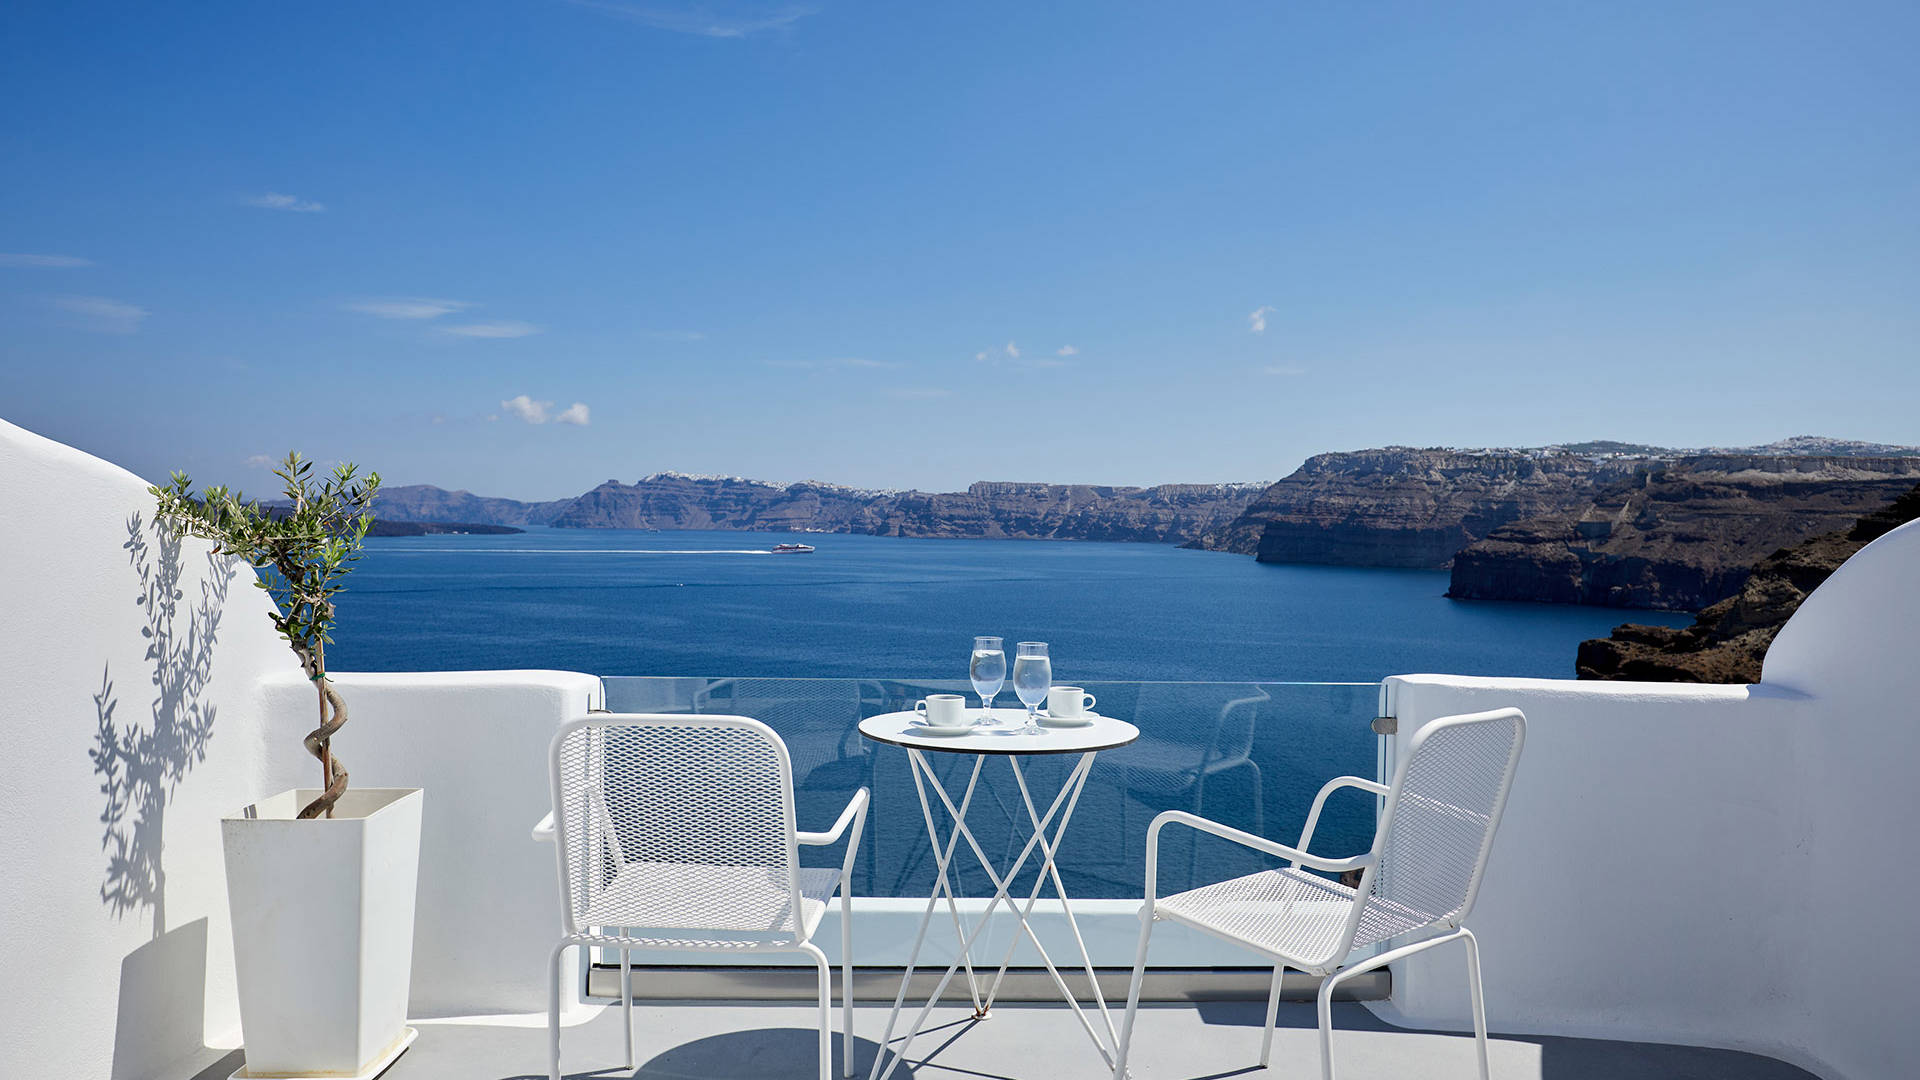 
Santorini View Hotel balcony in white colors with furniture and view at the aegean sea and caldera